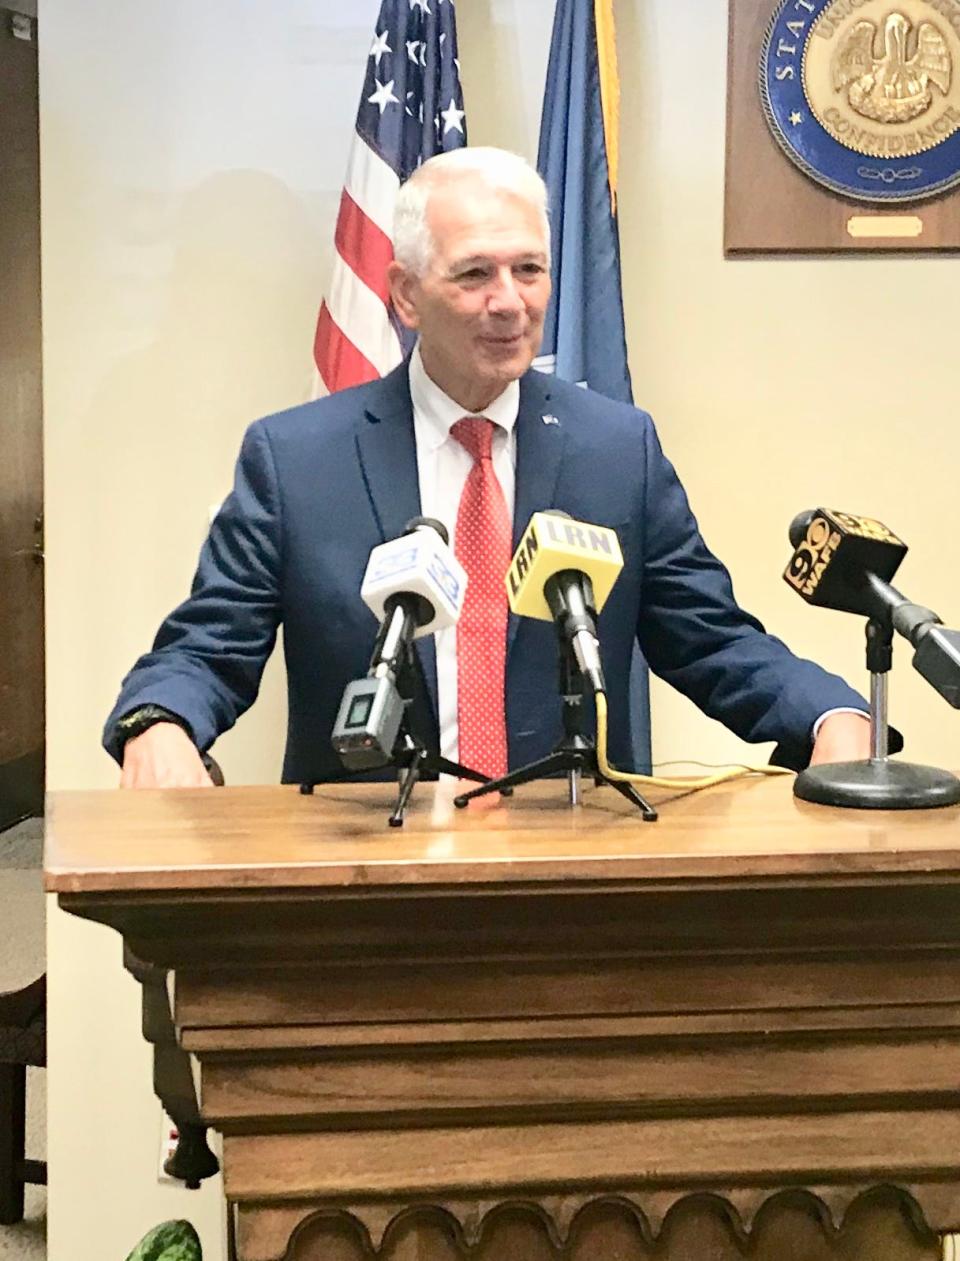 In this file photo, former Congressman Ralph Abraham, R-Alto, speaks to reporters on Aug. 6, 2019 at the Louisiana Secretary of State's office after qualifying to run for governor.